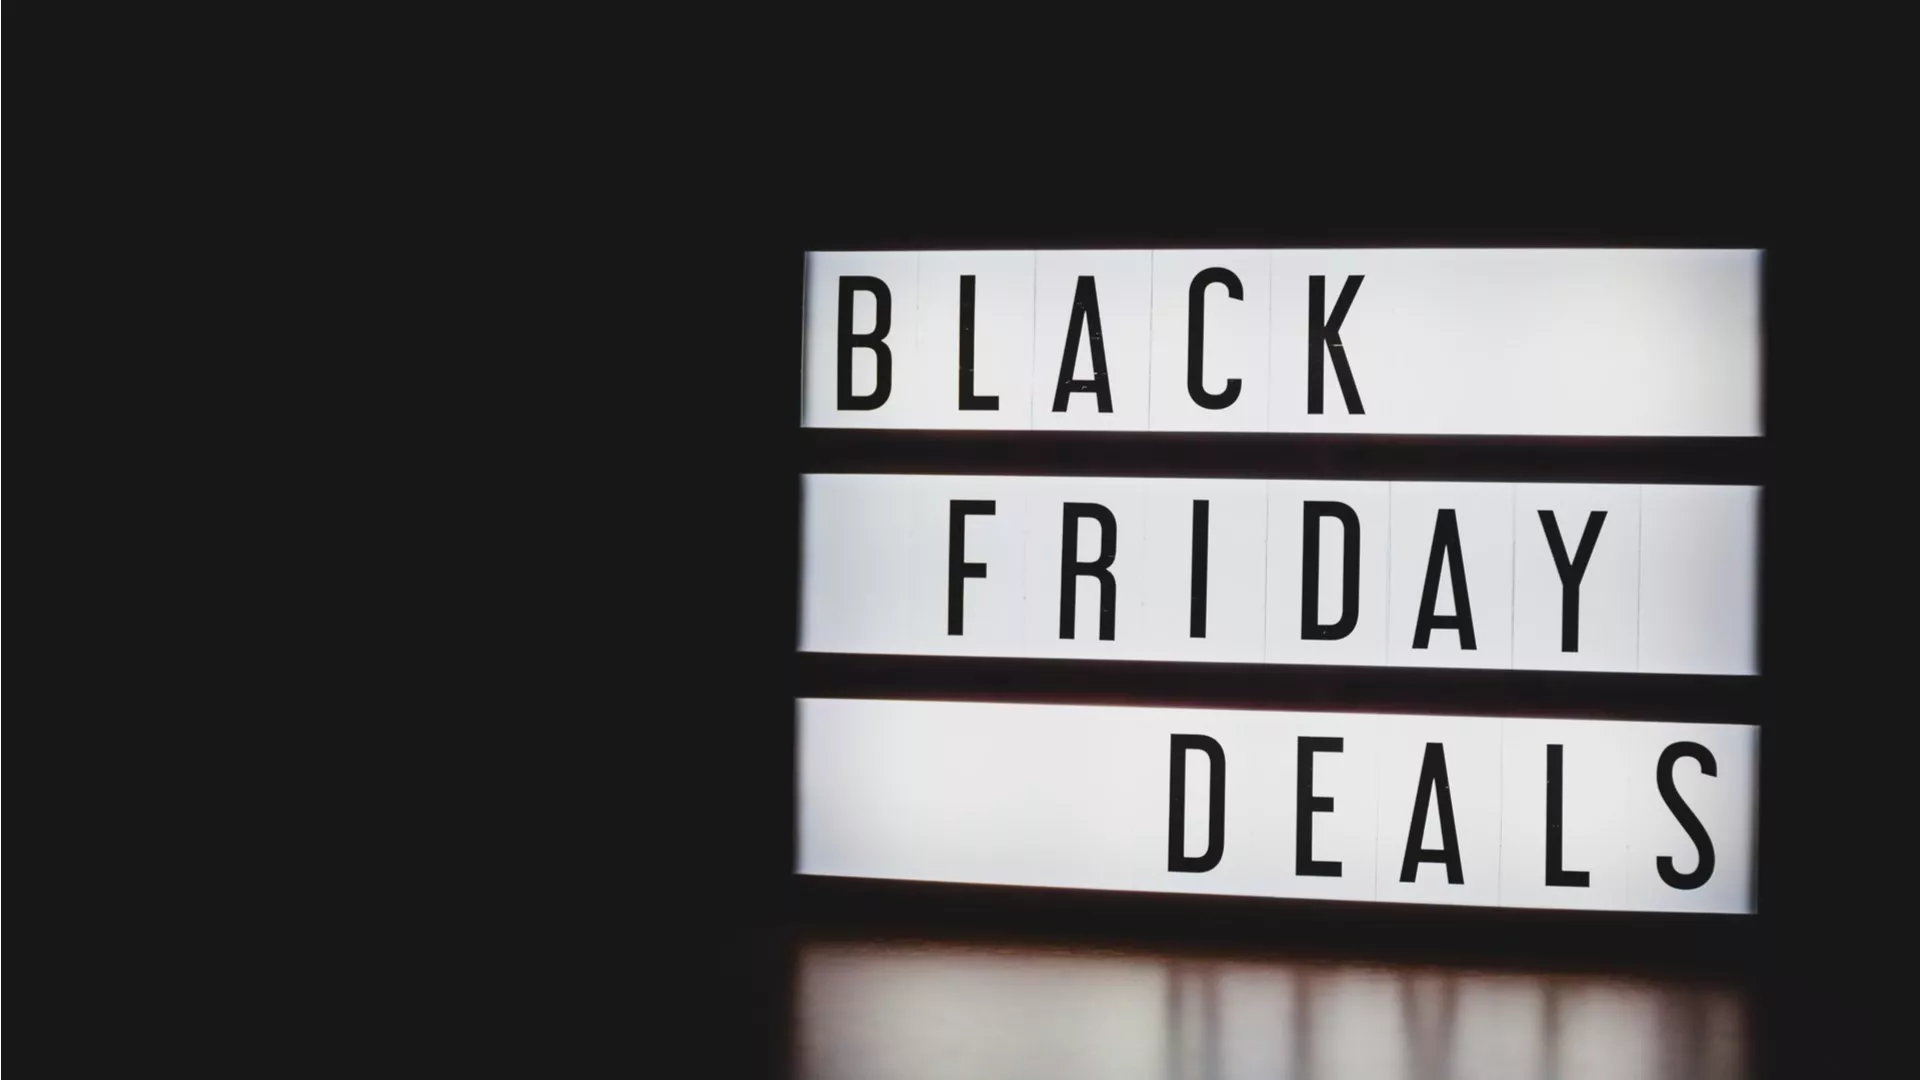 10 Best Black Friday Deals & Ads 2018 For Gadget Lovers - When To Black Friday Deals End